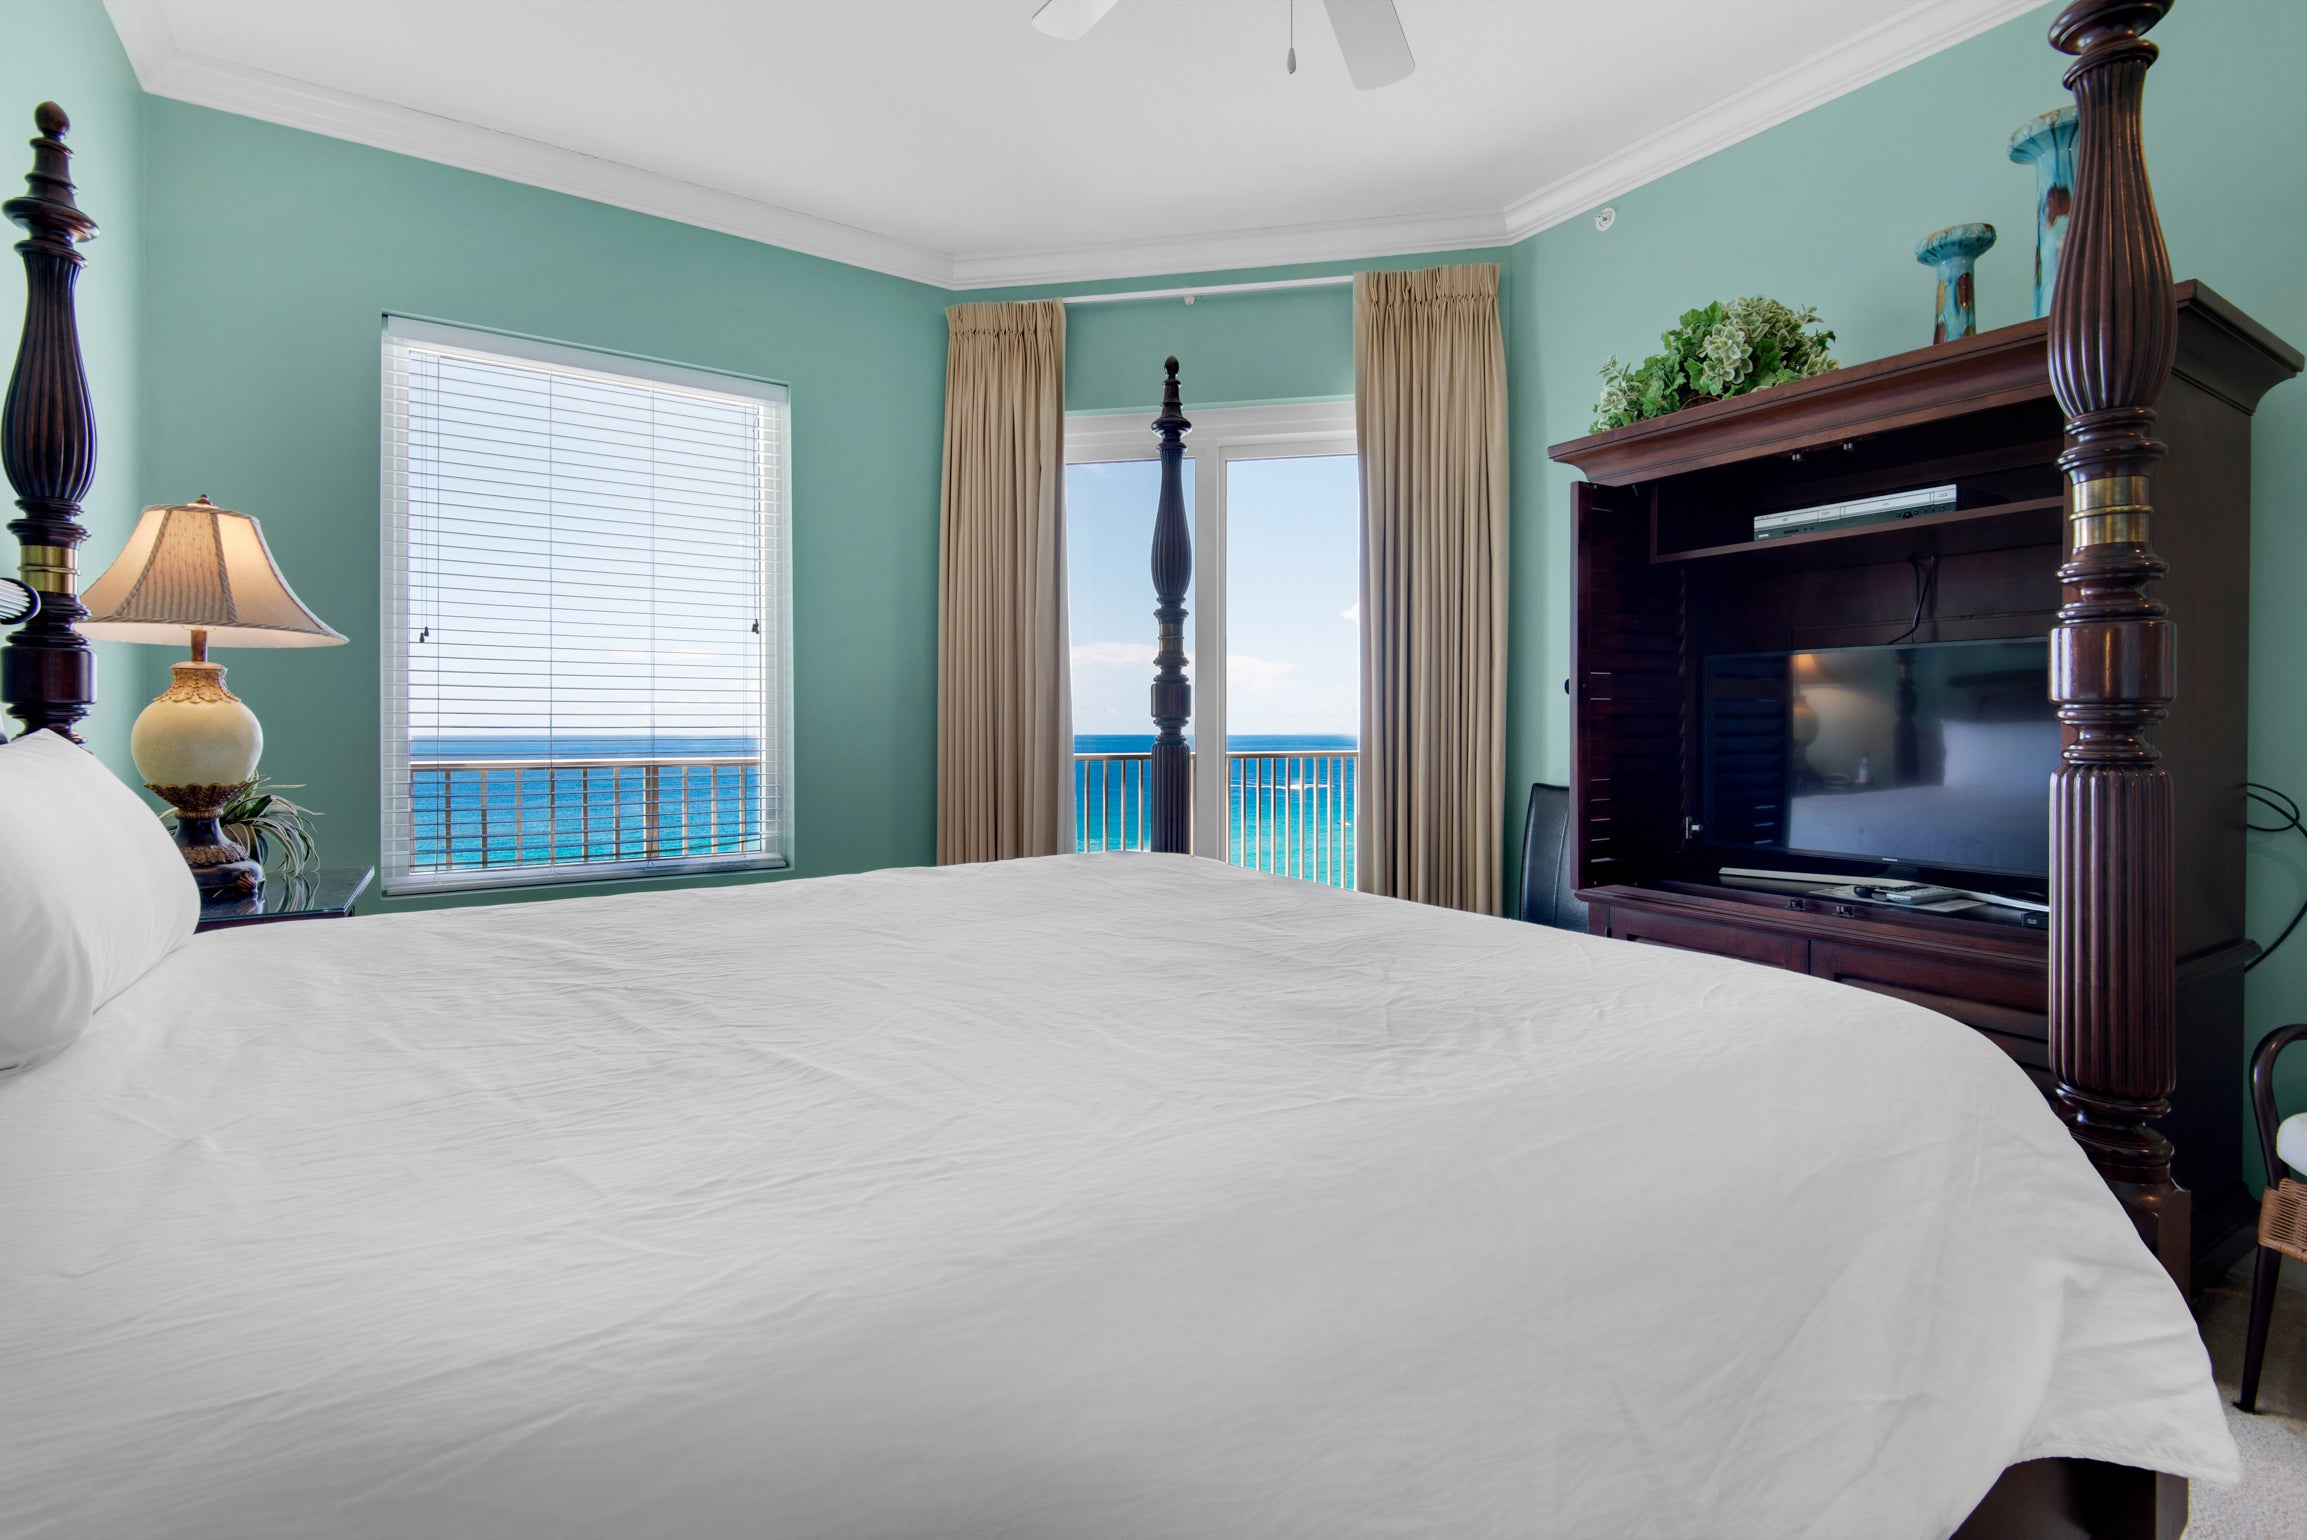 Master bedroom with balcony access and flat screen